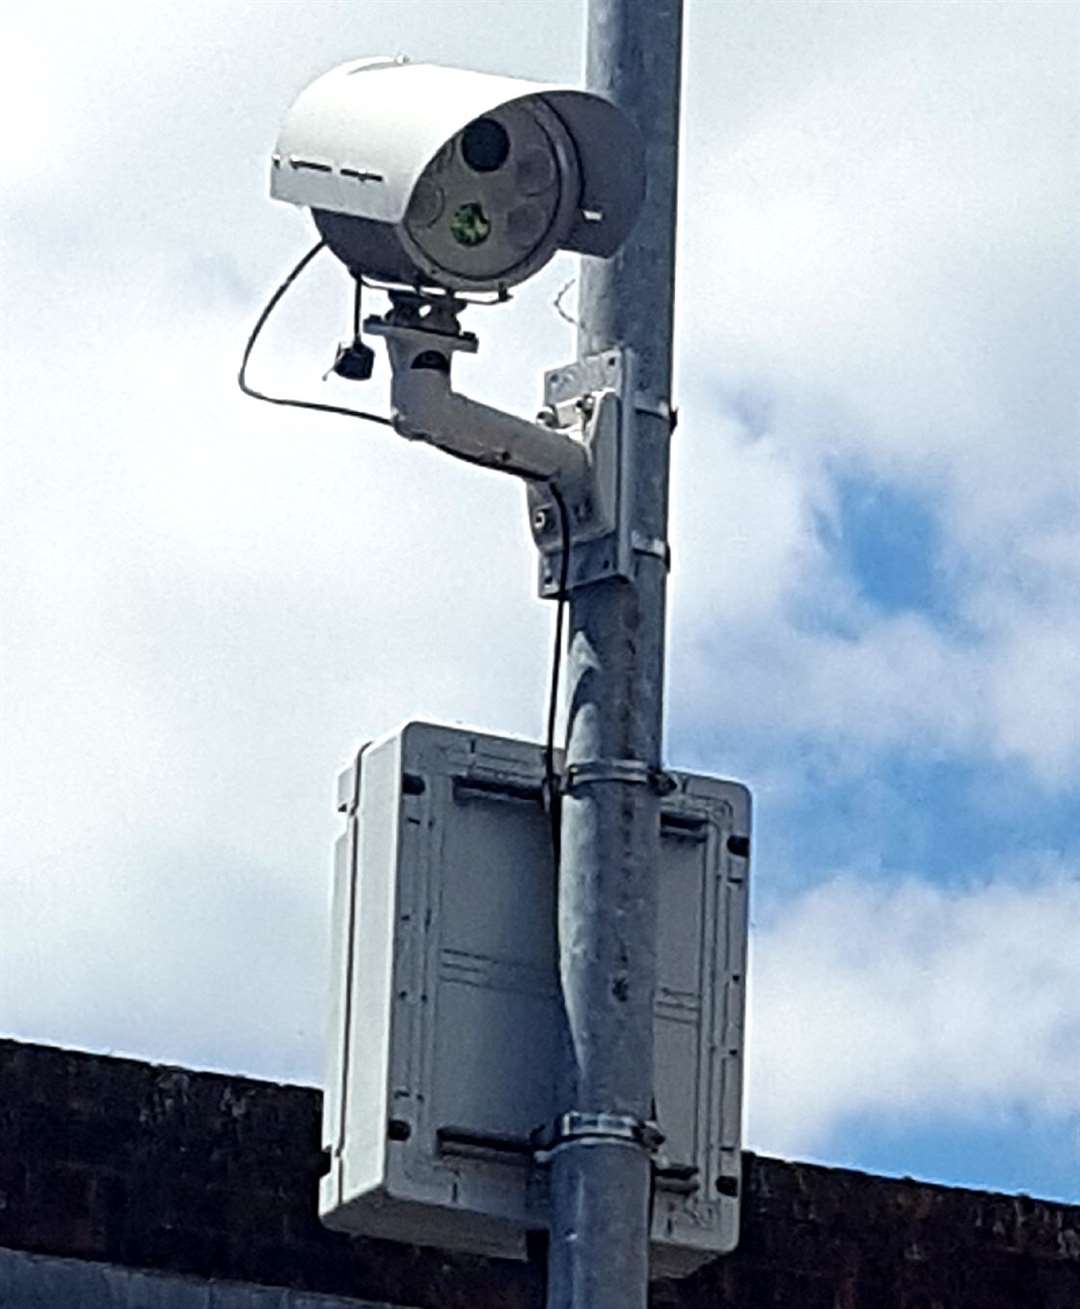 ANPR cameras have been introduced across Medway